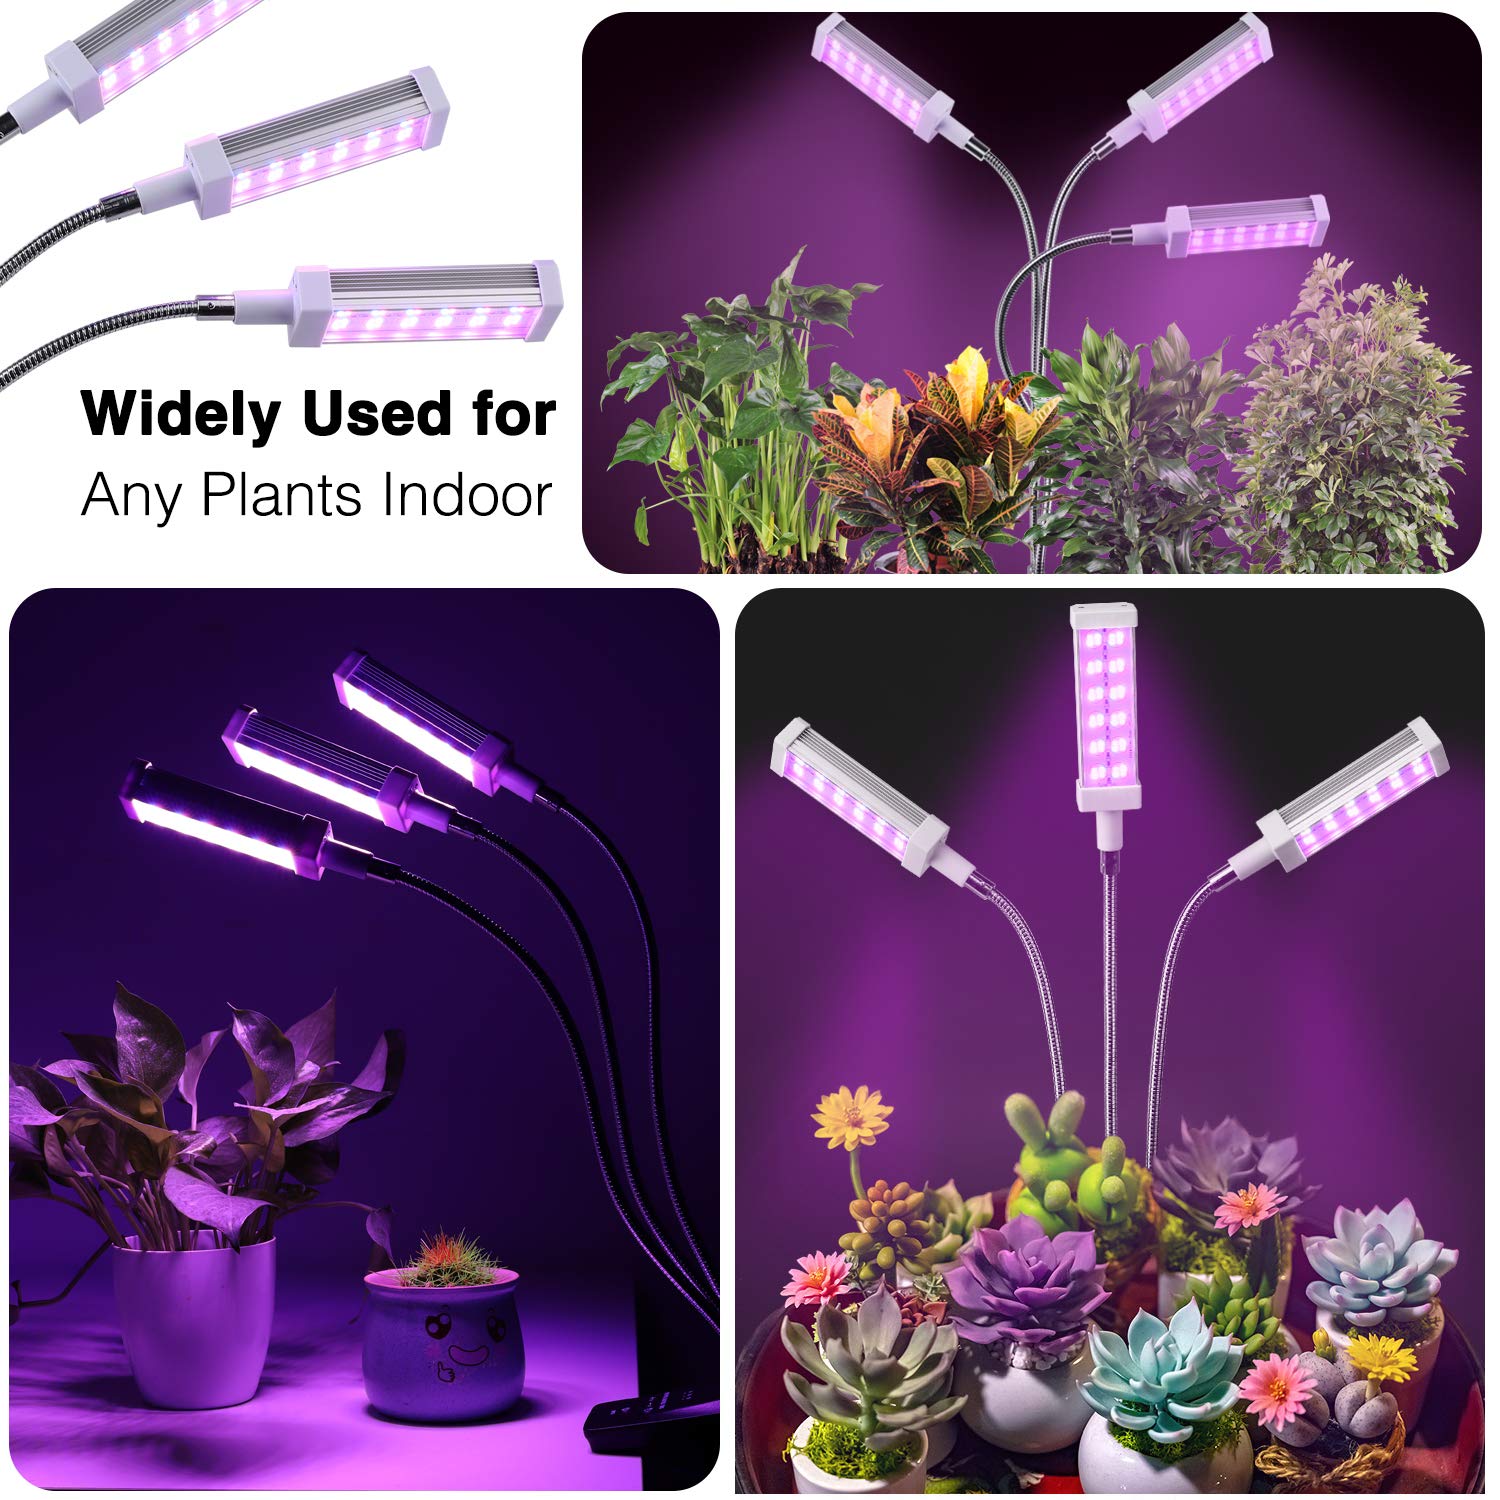 LED Plant Growth Lamps